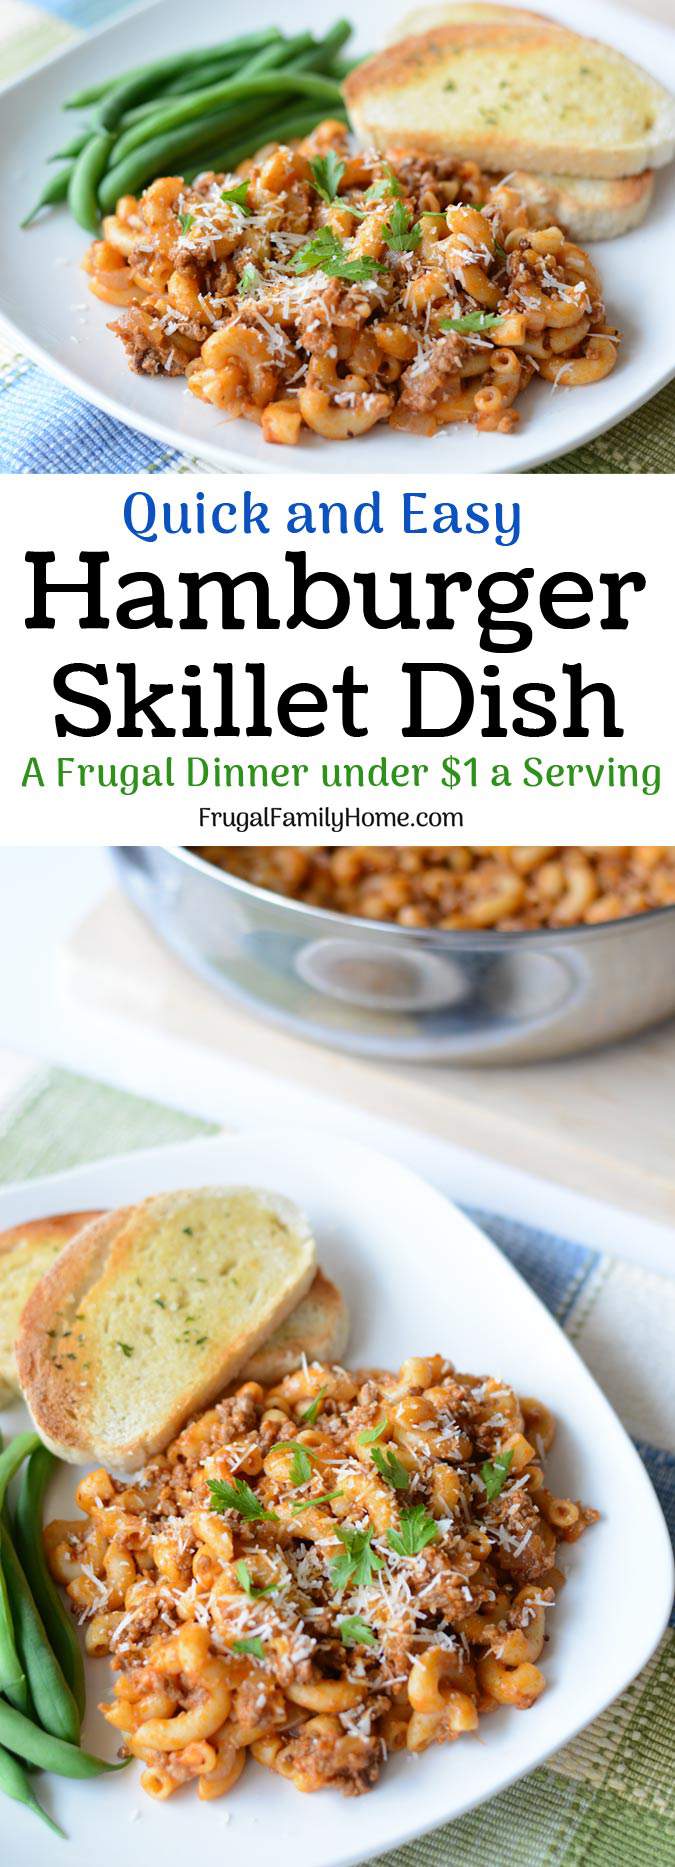 Hamburger Noodle Skillet Dinner, this is a simple comfort food that can be made in 20 minutes in a skillet. If you love easy to make recipes that don’t break the bank give this hamburger skillet recipe a try. At less than $1 a serving, it’s hard to beat.